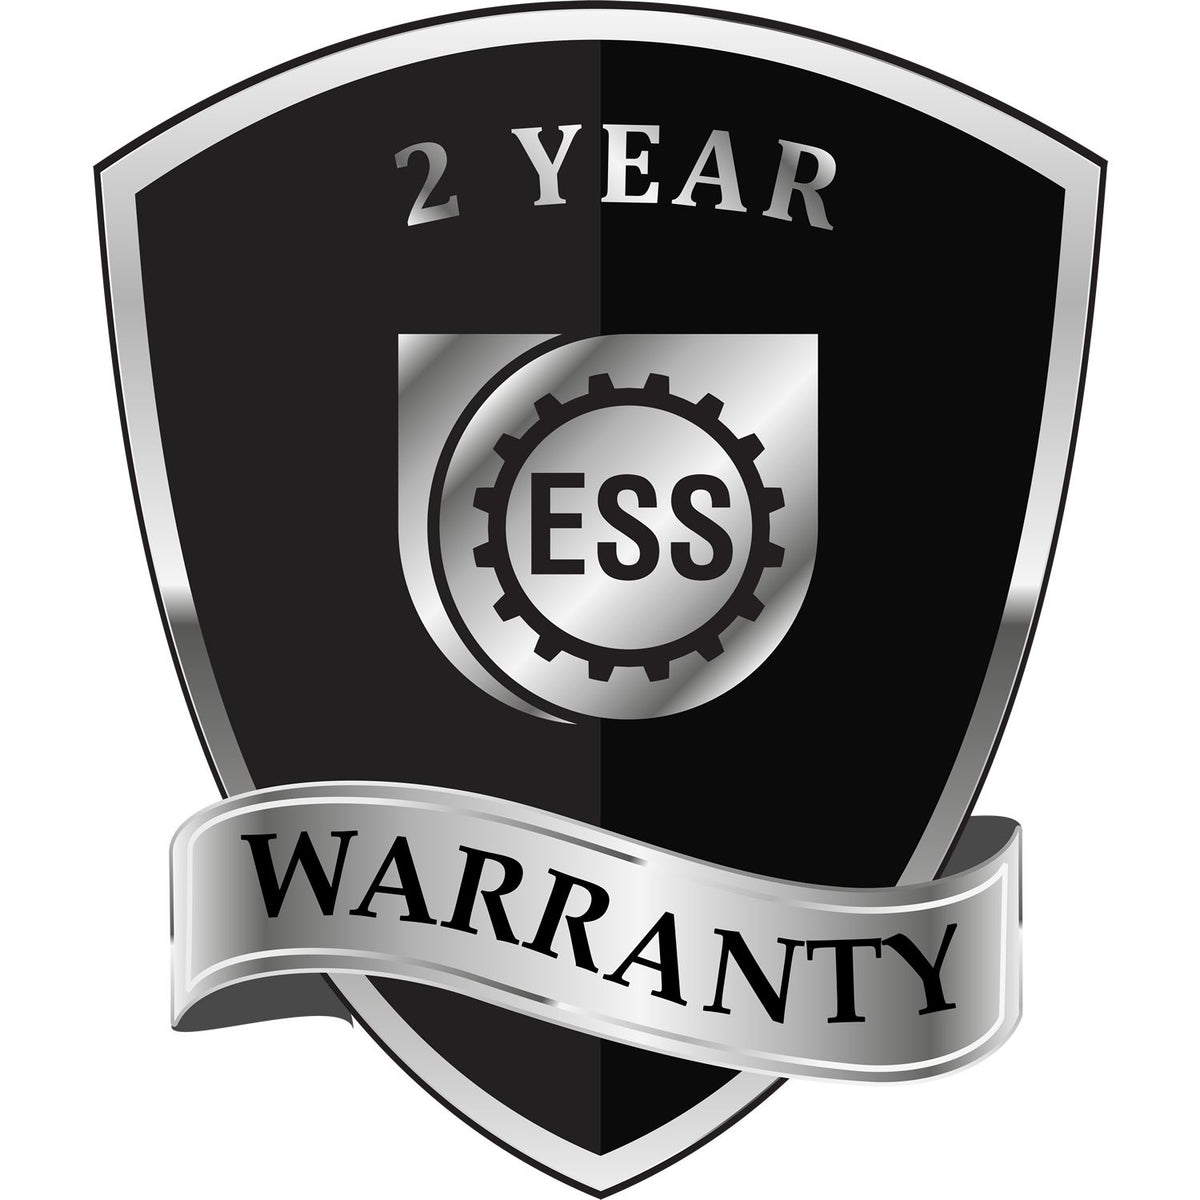 A black and silver badge or emblem showing warranty information for the Gift Mississippi Engineer Seal